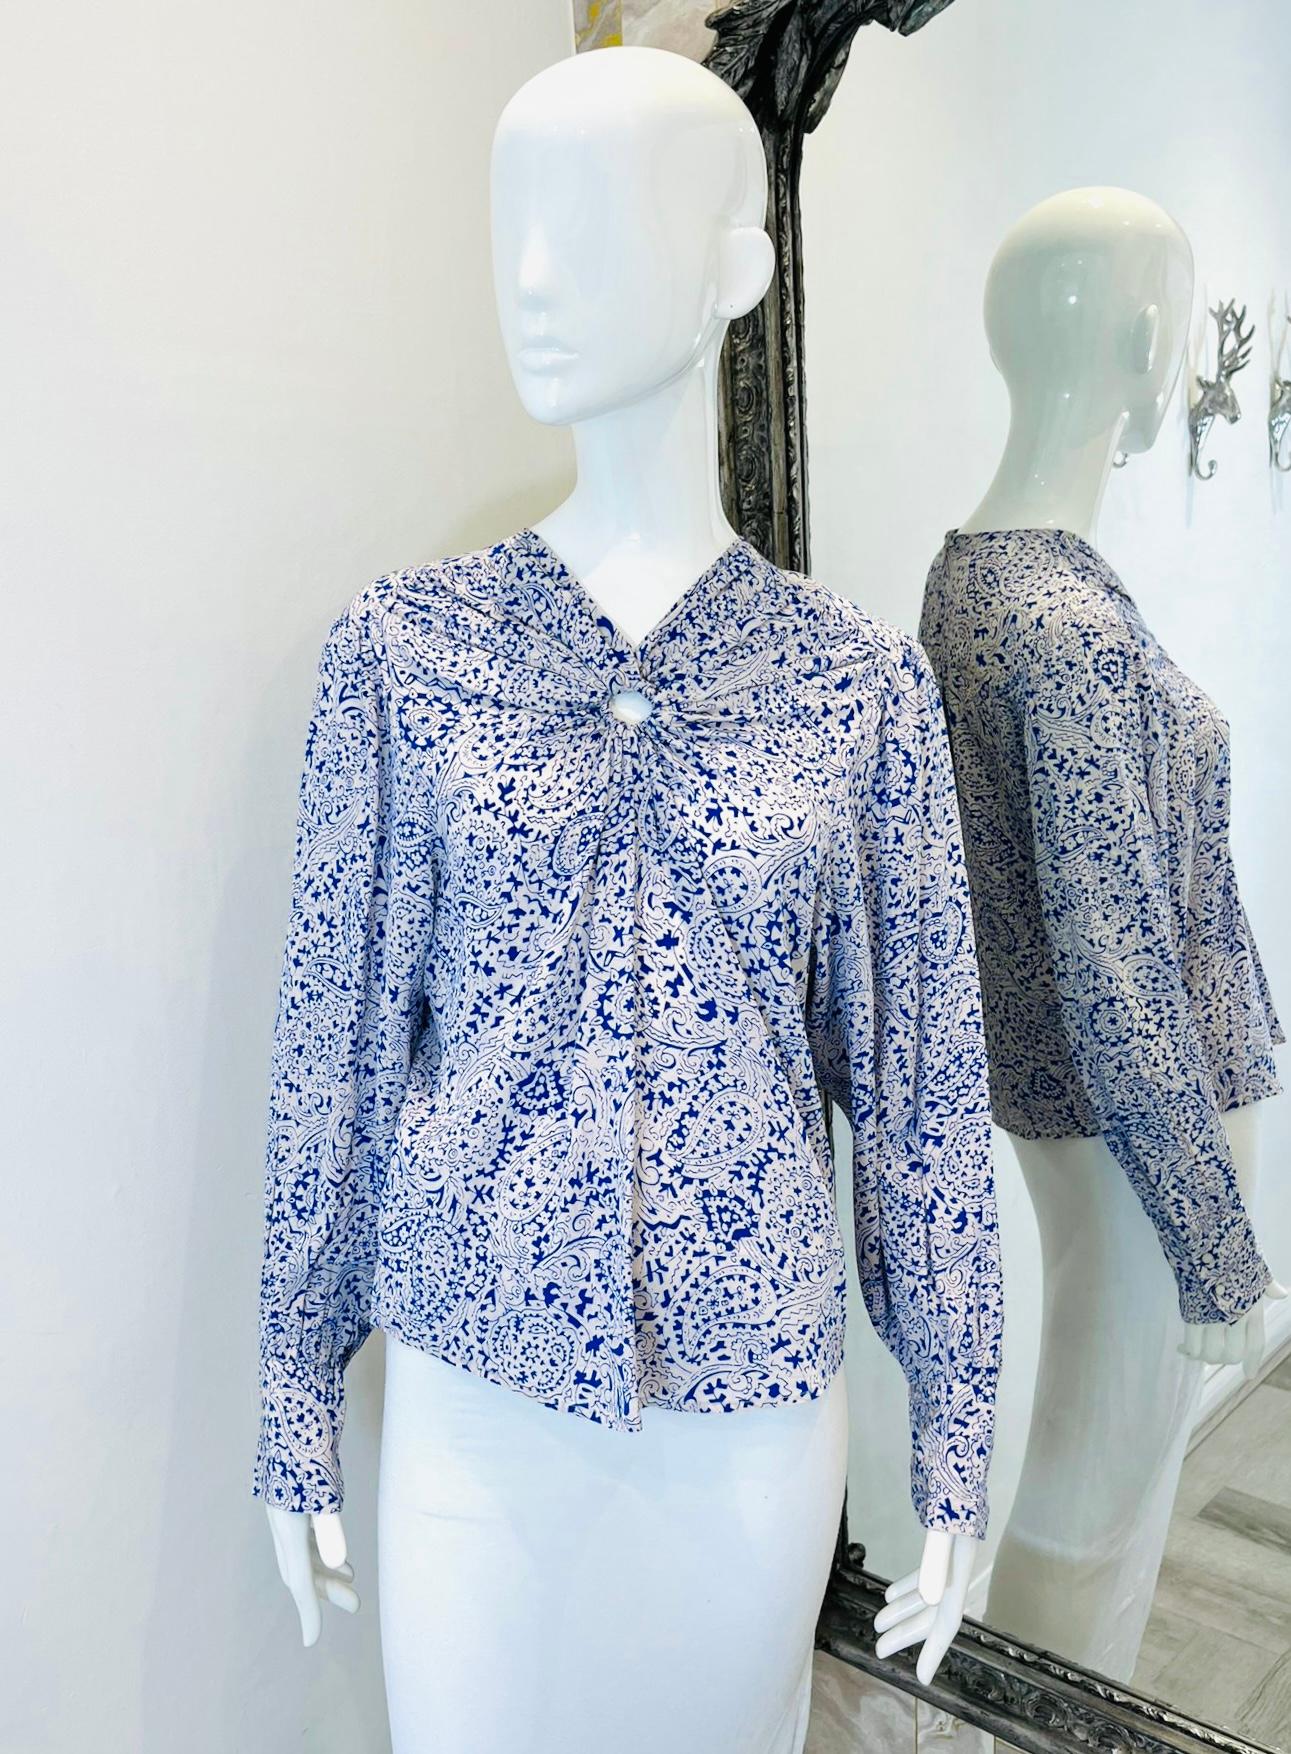 Isabel Marant Printed Silk Top

White, long sleeved blouse designed with paisley print in blue.

Detailed with gathered cut-out detail to the centre.

Styled with V-Neckline and regular fit silhouette.

Size – 40FR

Condition – Very